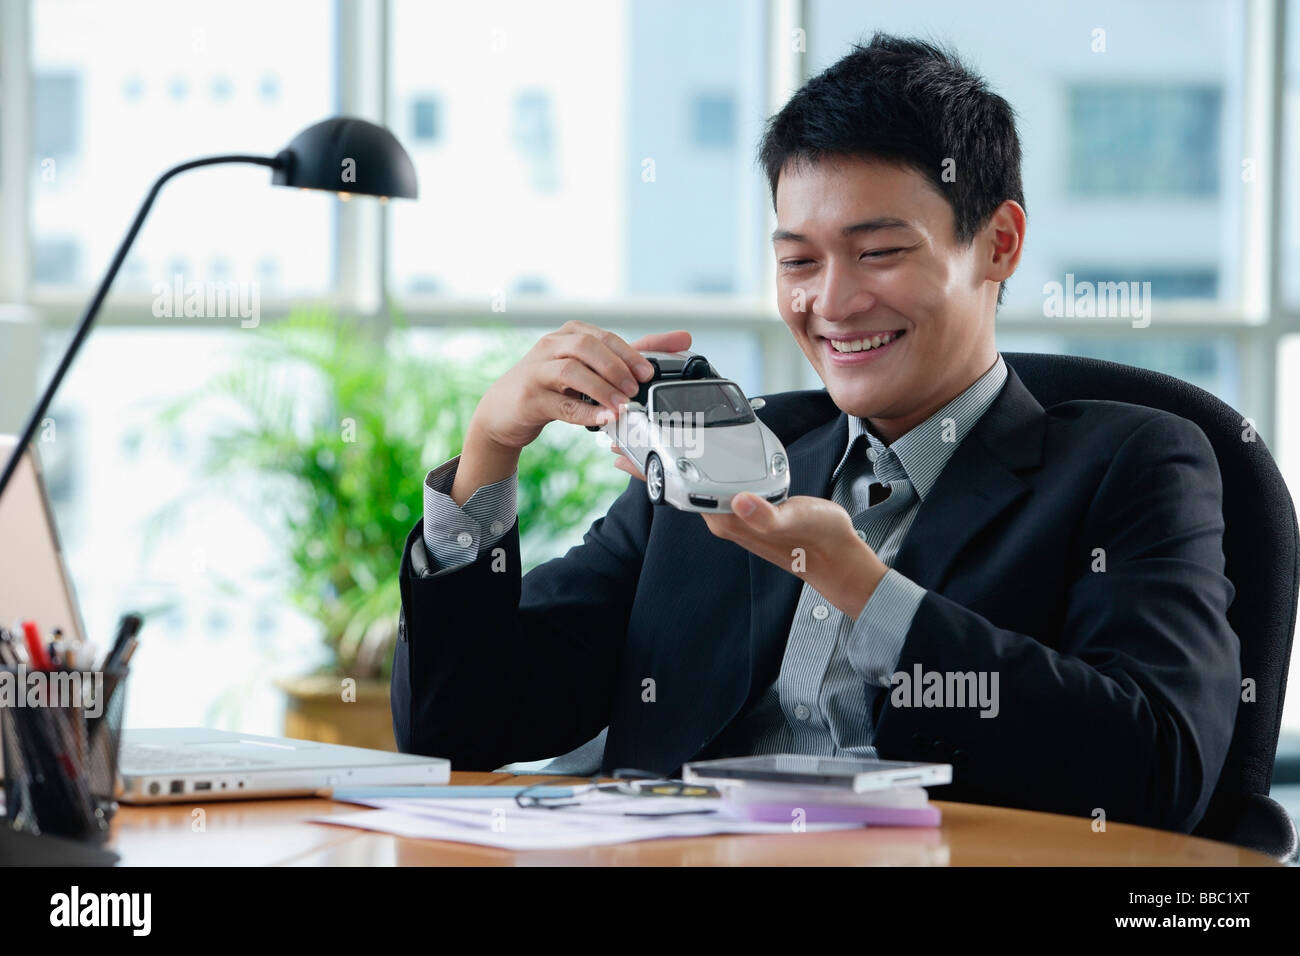 A man plays with a toy car on his desk Stock Photo